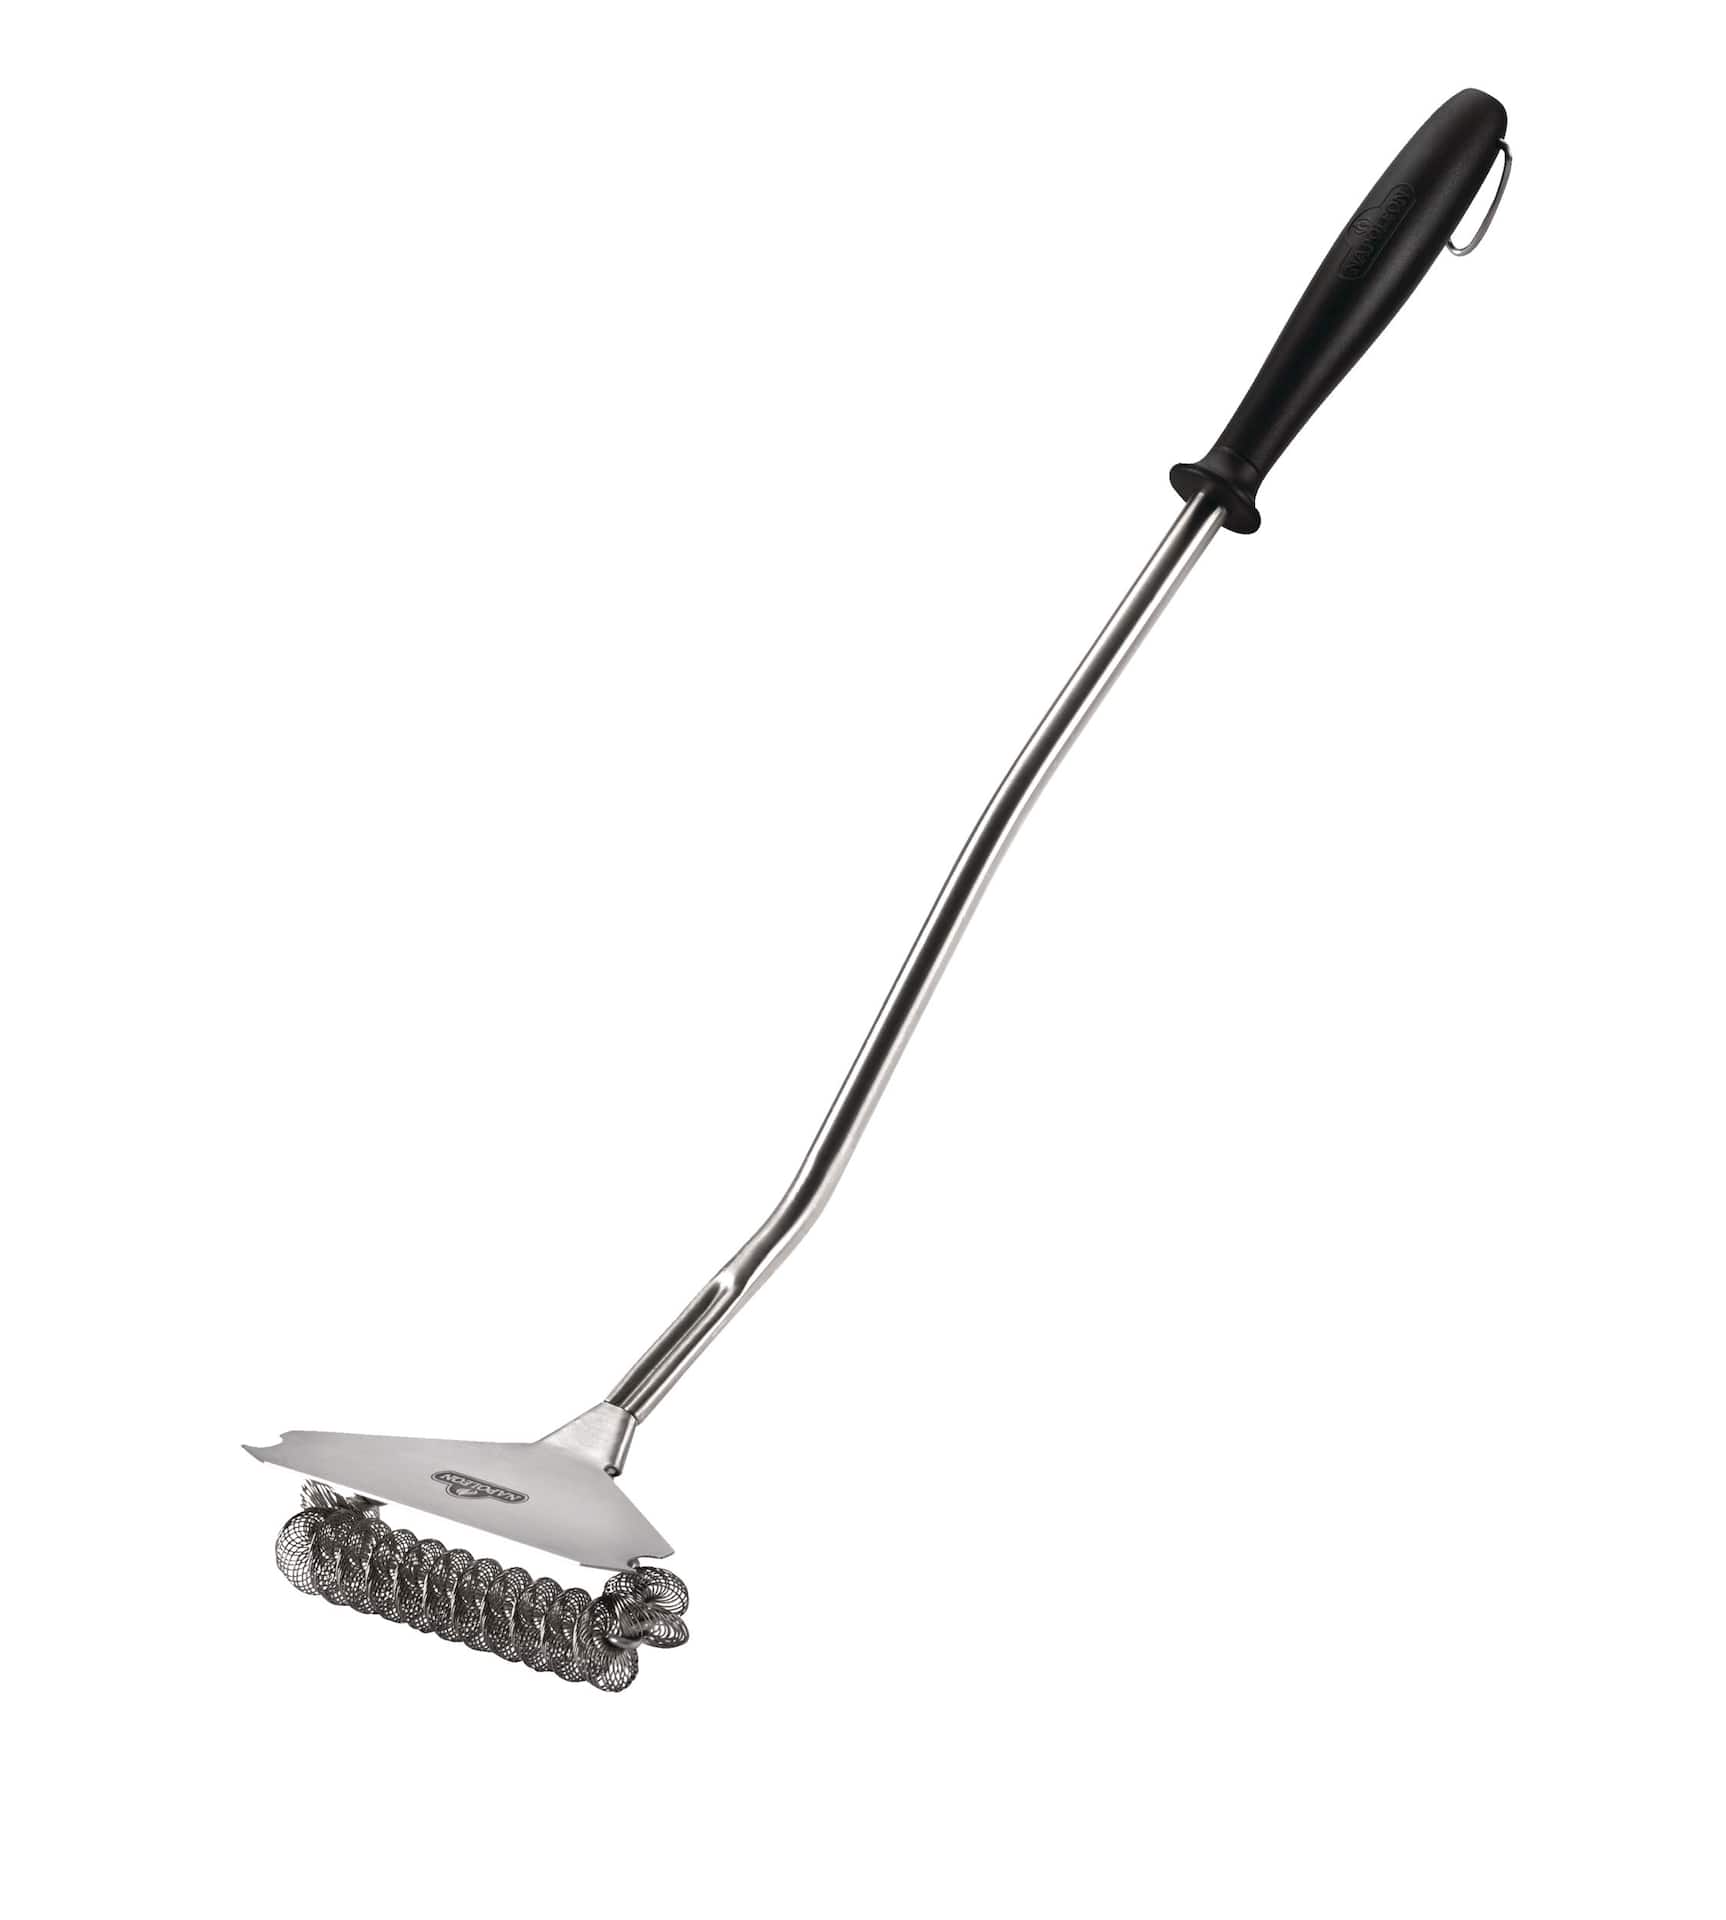 https://media-www.canadiantire.ca/product/seasonal-gardening/backyard-living/outdoor-cooking-accessories/0852275/napoleon-coil-grill-brush--bbe2a336-25aa-4241-b0b1-15a36f7249cd-jpgrendition.jpg